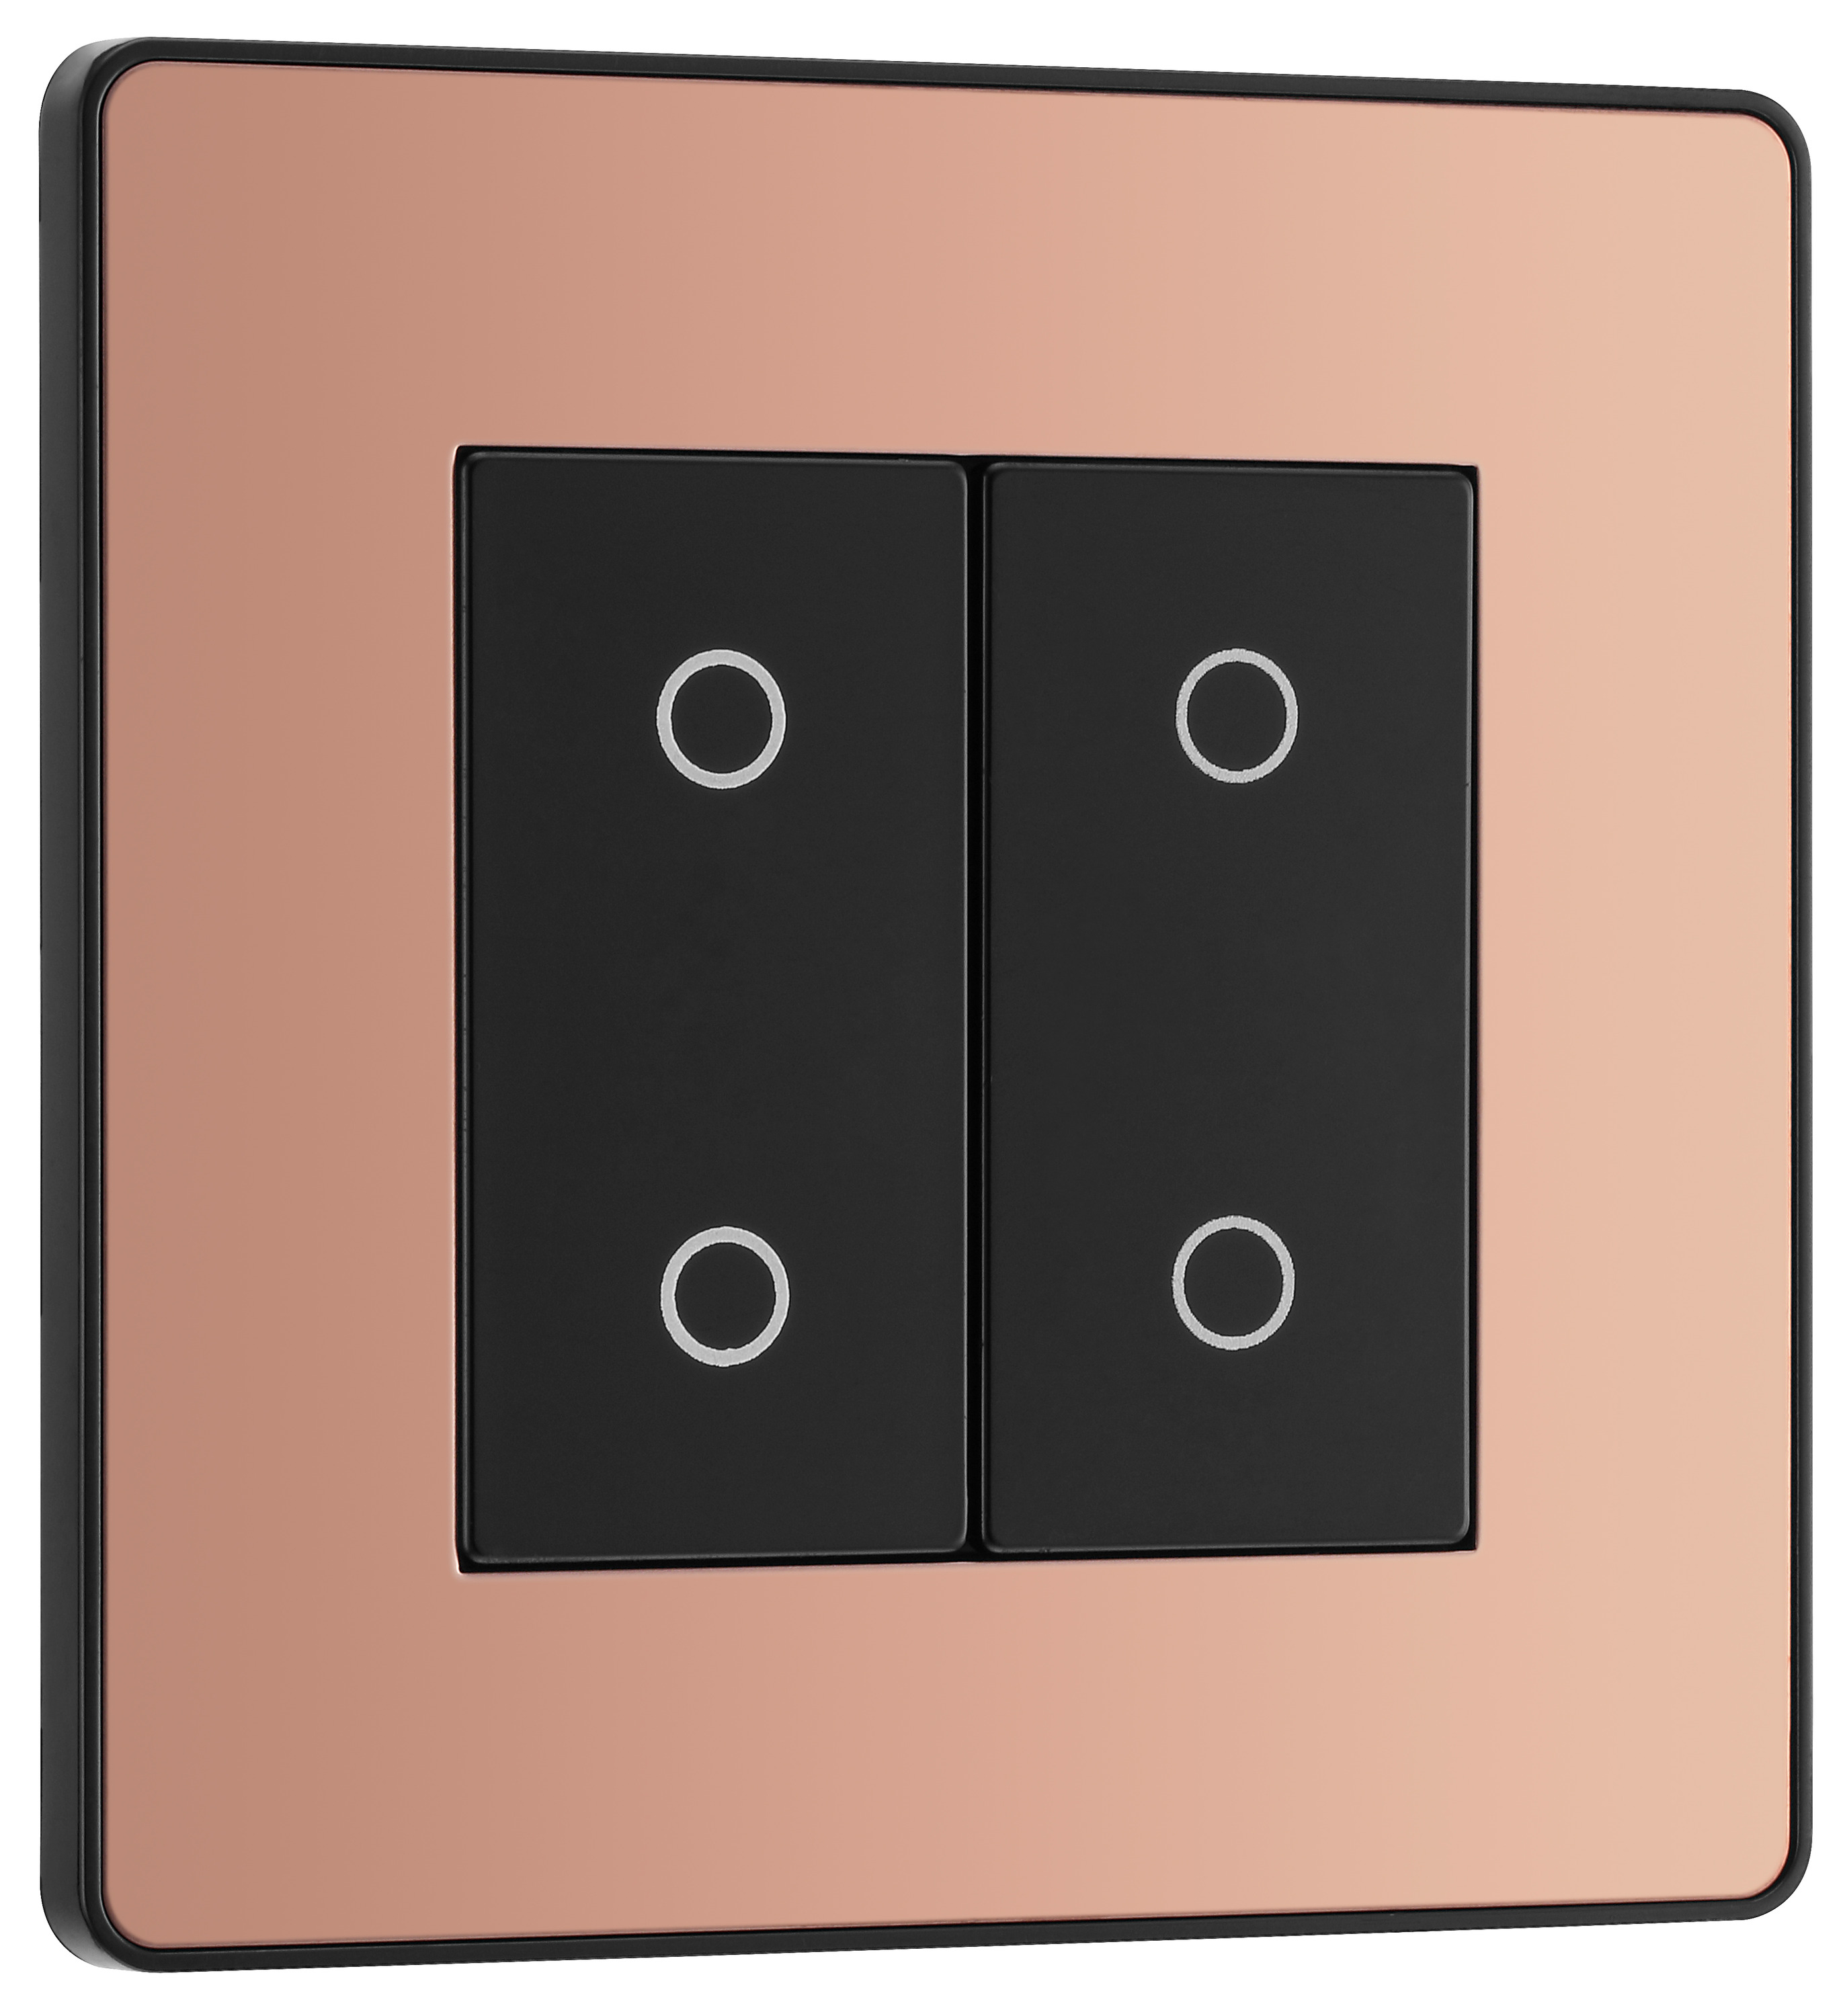 Image of BG Evolve Secondary Polished Copper 2 Way Double Touch Dimmer Switch - 200W